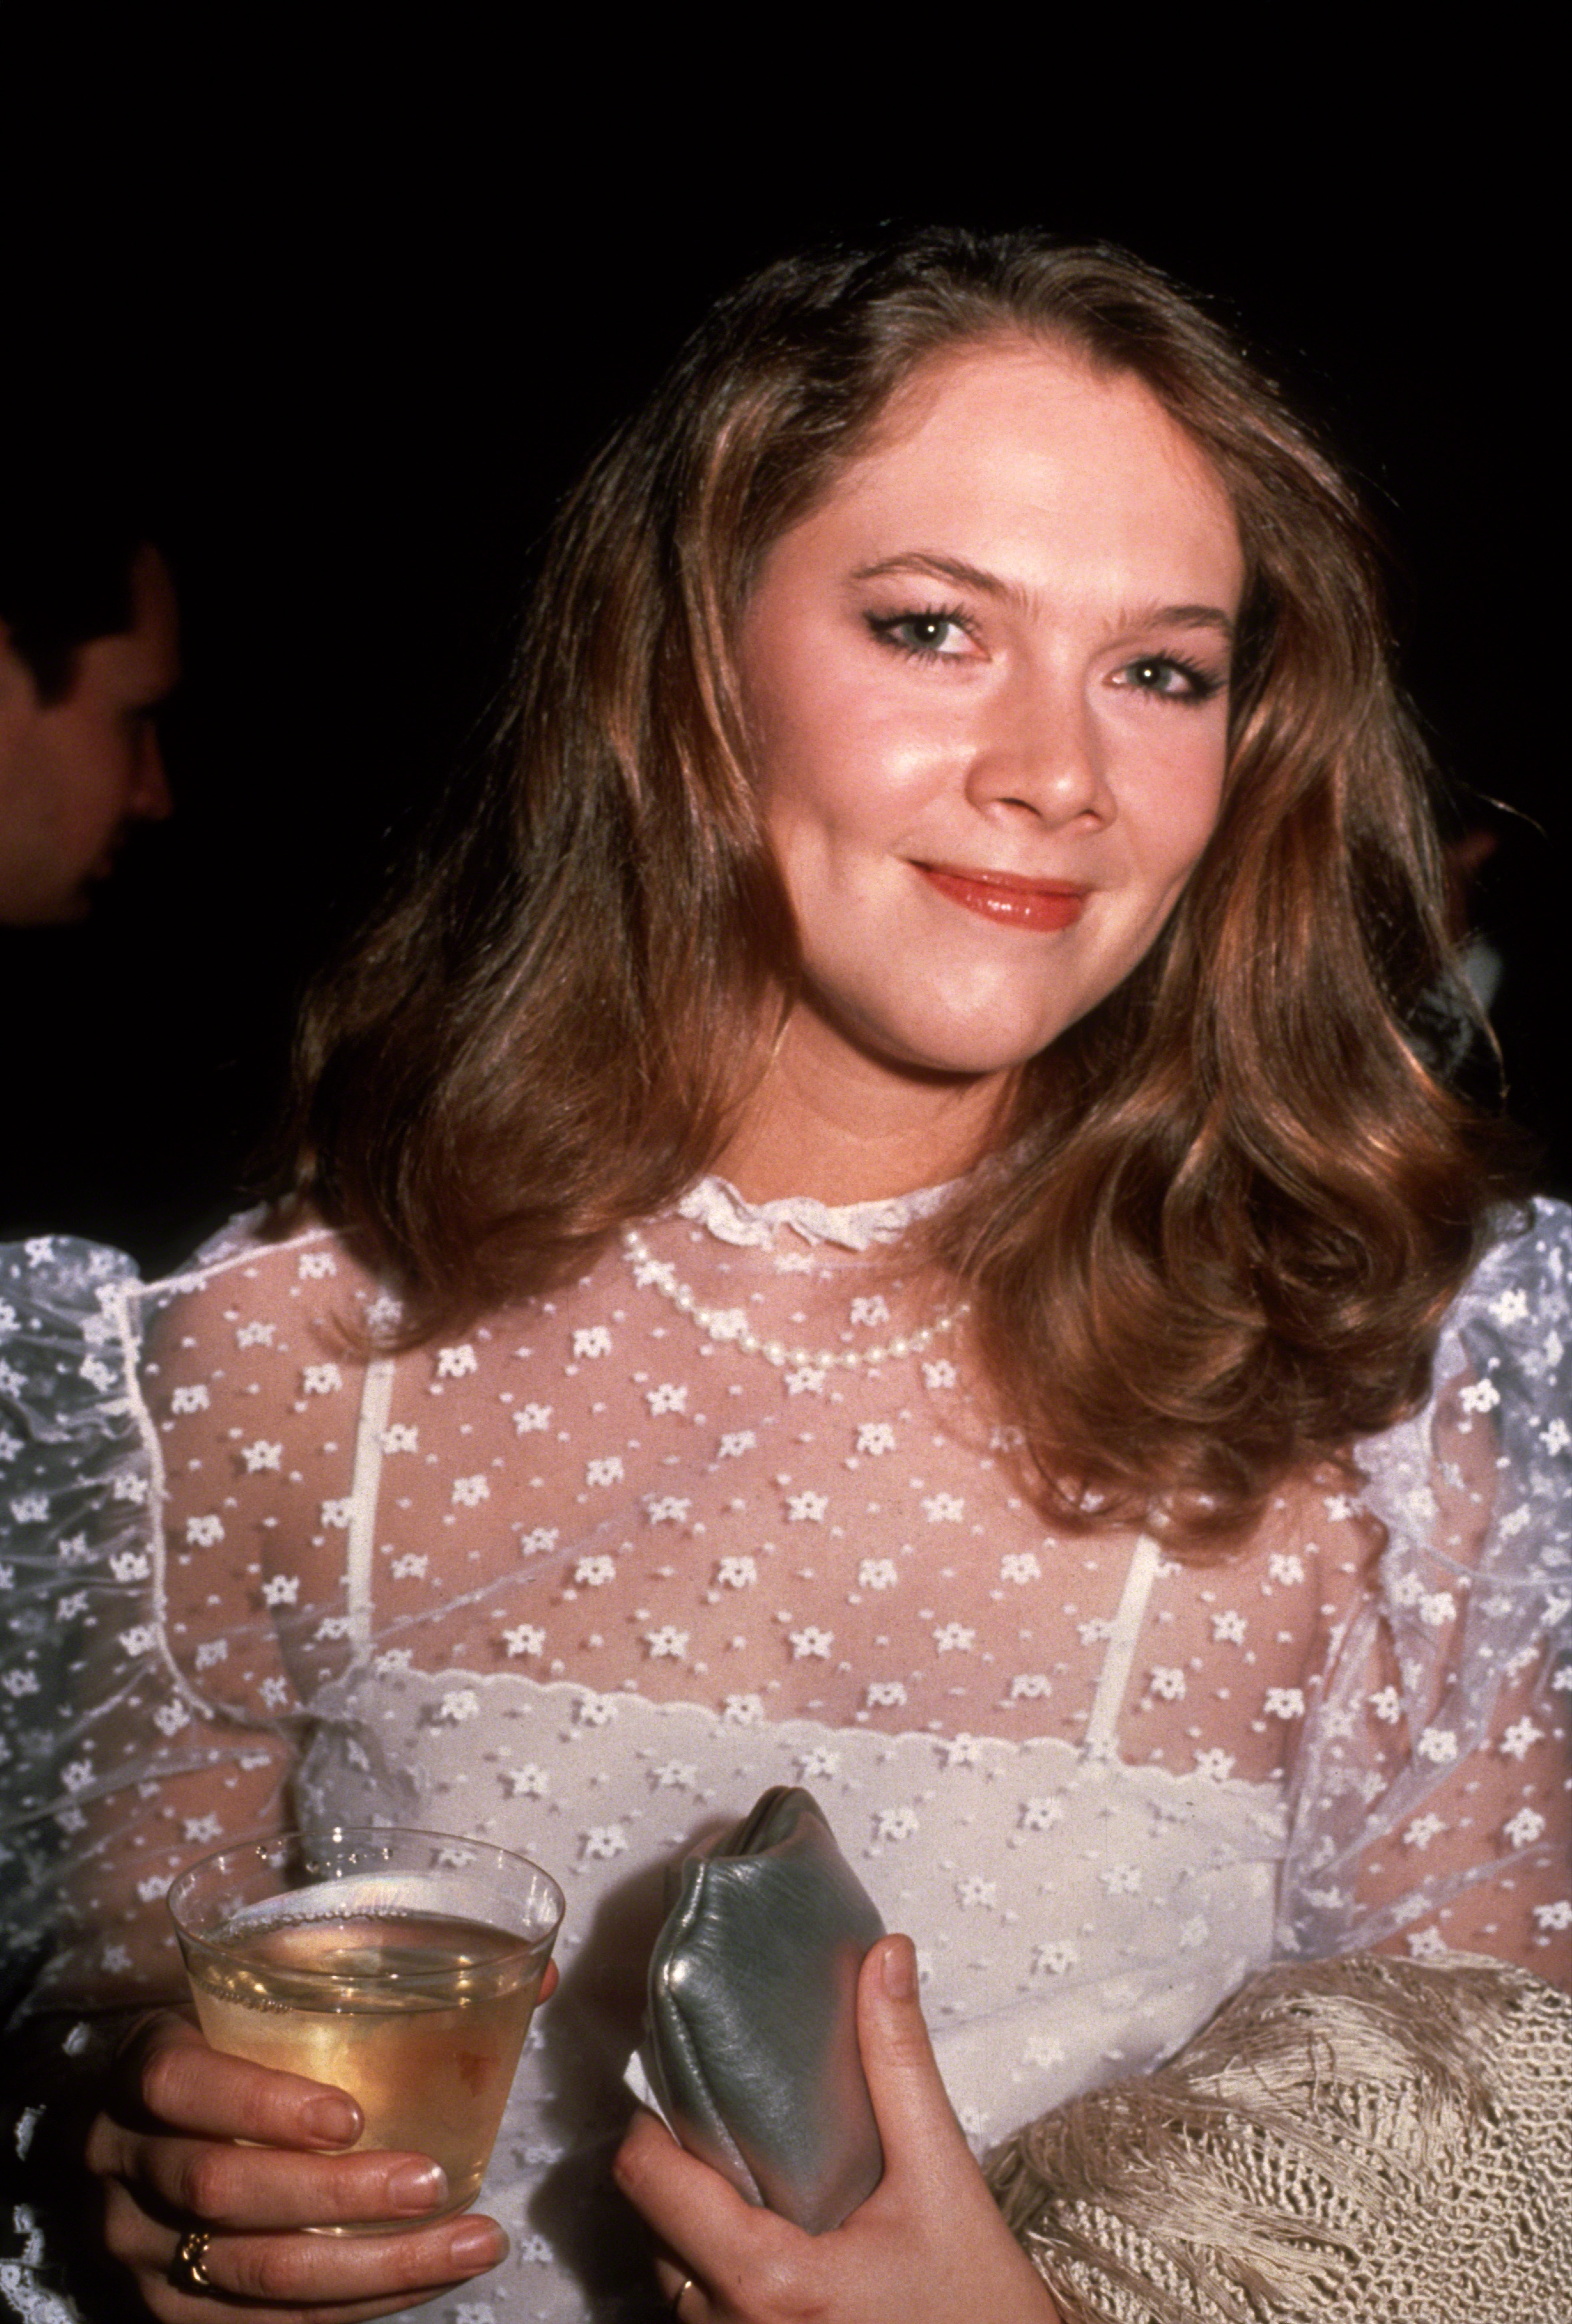 Kathleen Turner am 1. Januar 1981 in New York City. | Quelle: Getty Images